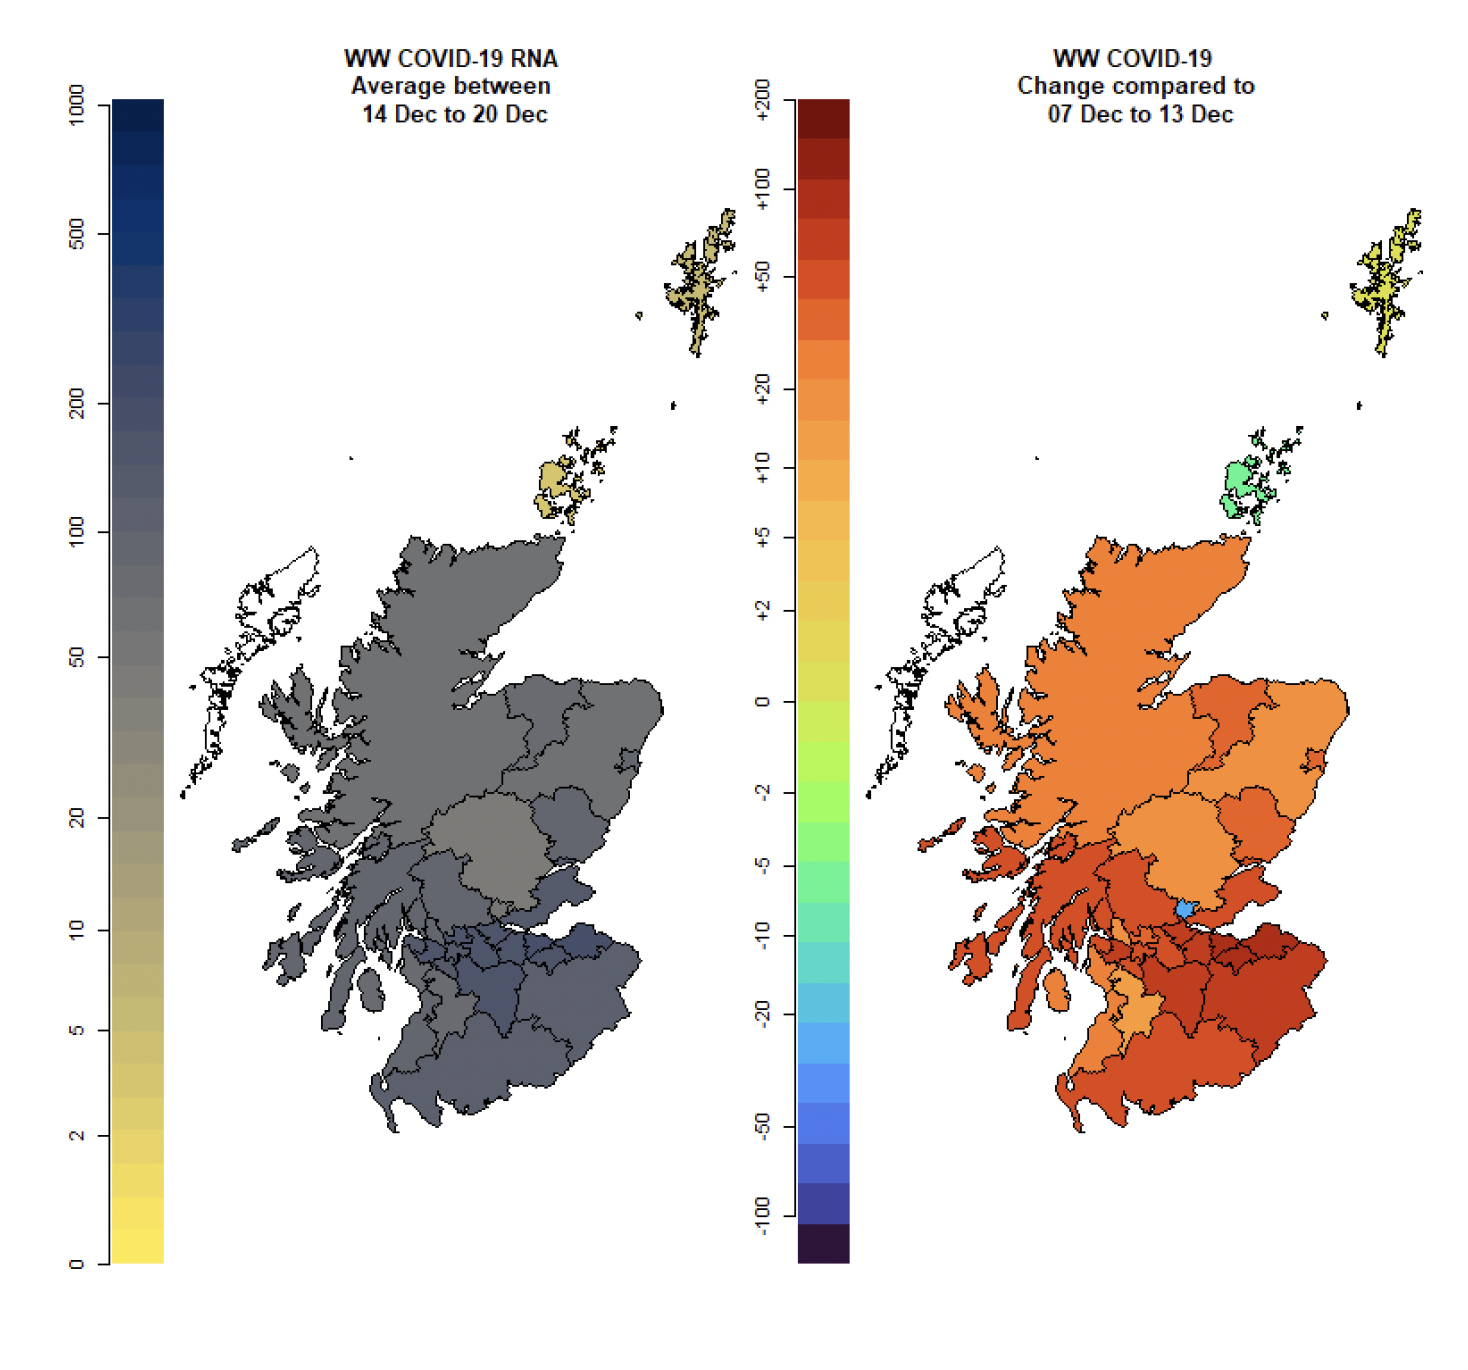 Two maps of Scotland, showing Covid-19 levels by local authority and the change compared to the previous period.